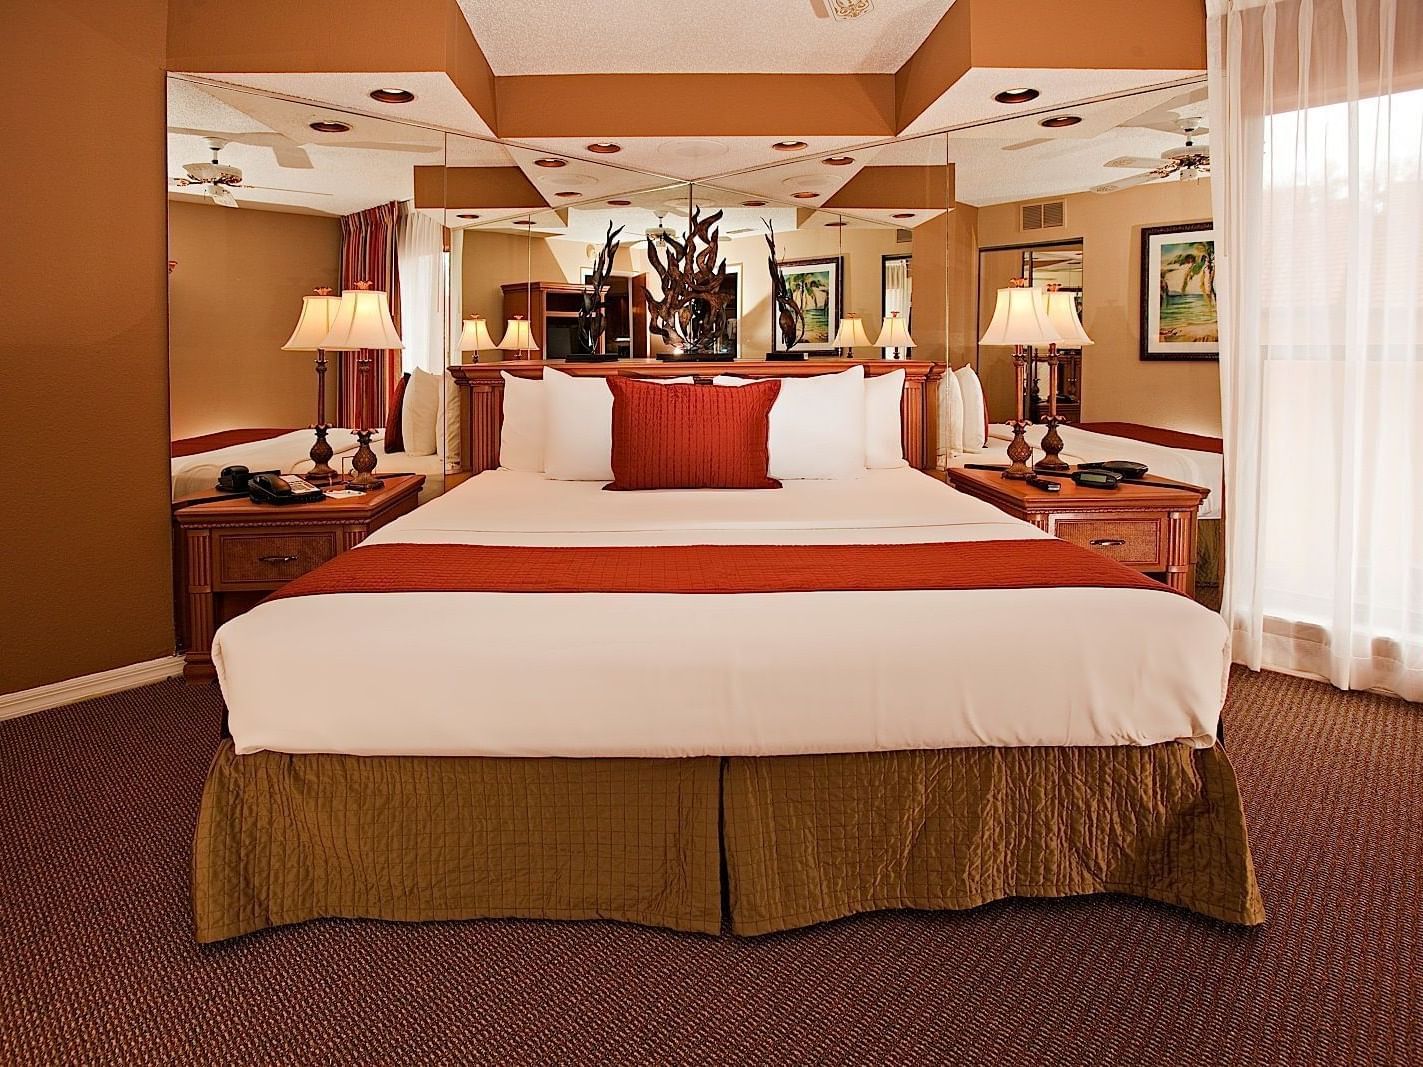 One bedroom deluxe suite at Legacy Vacation Resorts